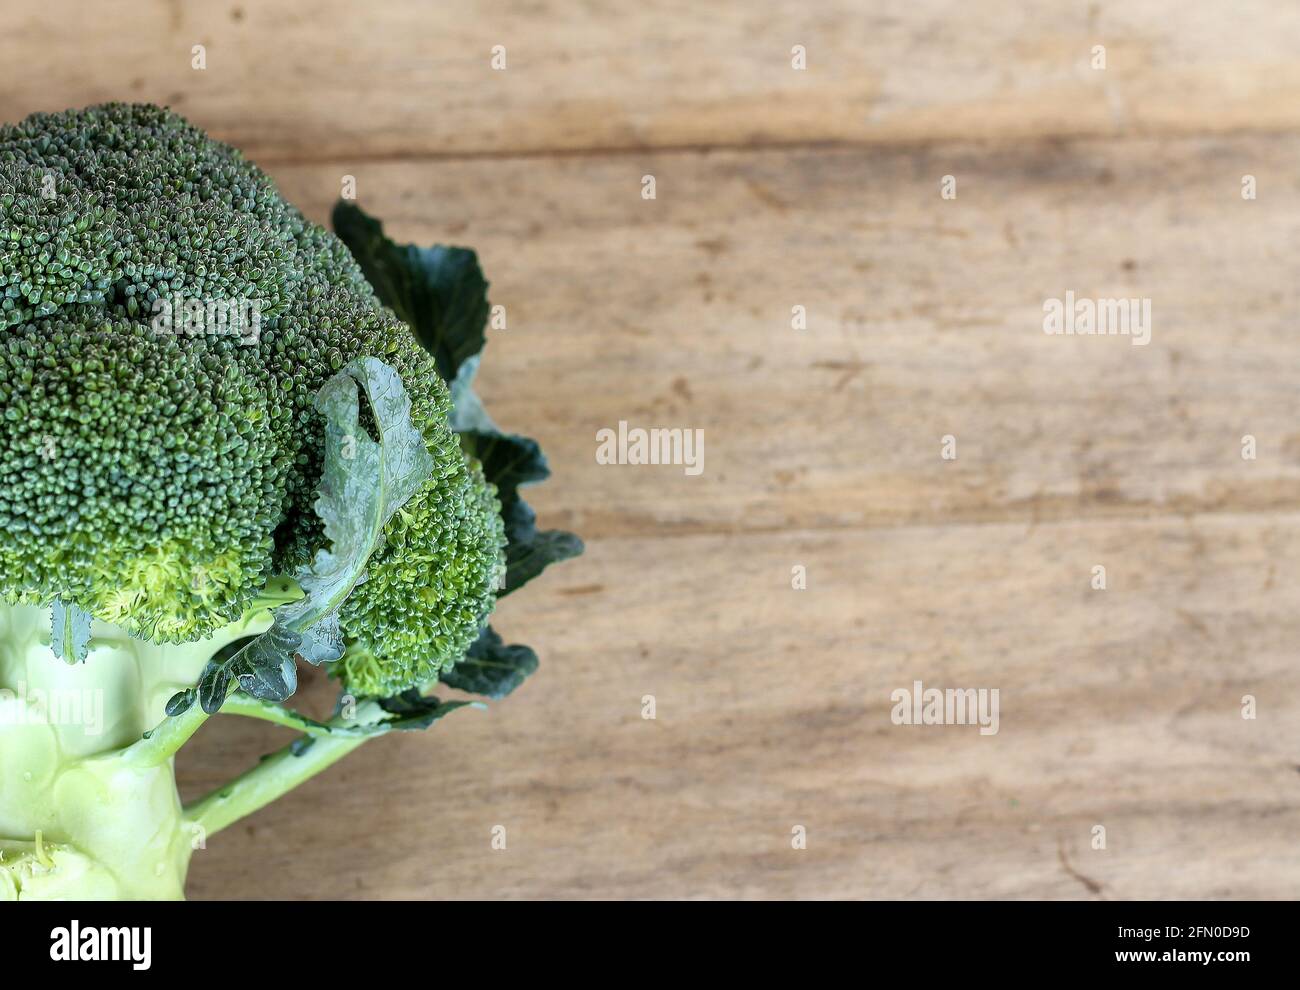 Green broccoli on a wooden table top leaves space for text messages. Stock Photo